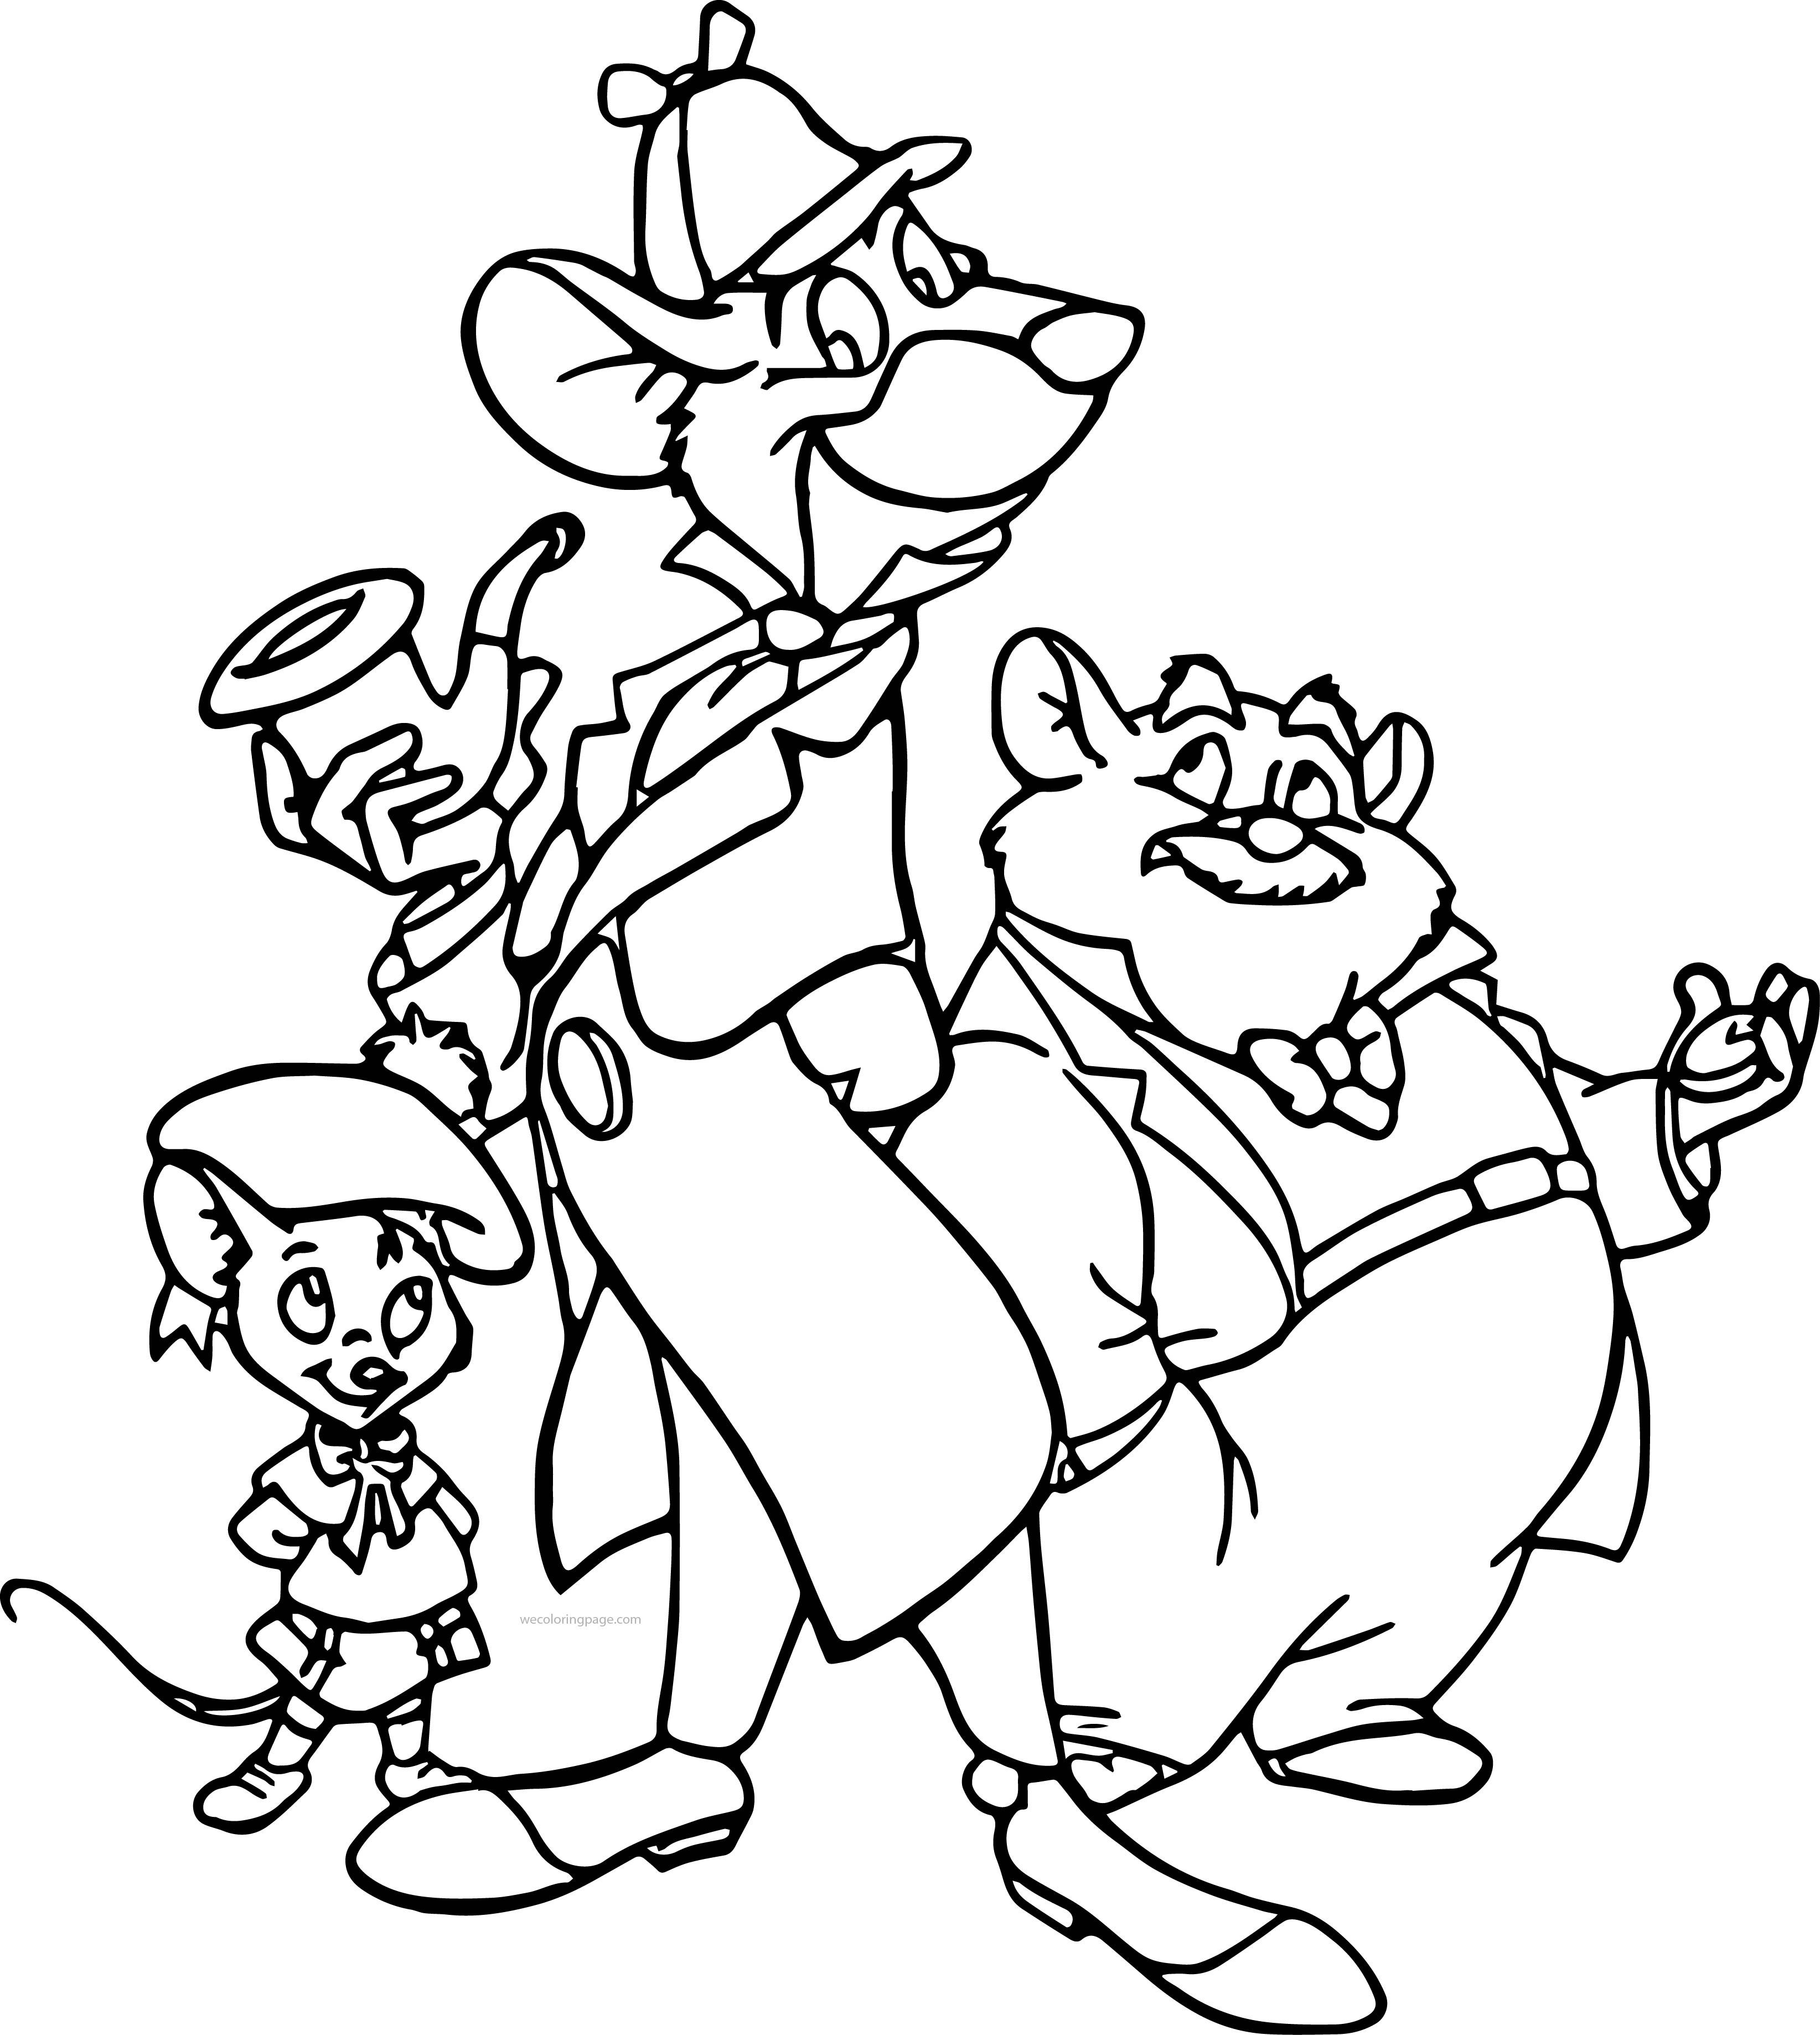 The Great Mouse Detective Coloring Pages | Cartoon coloring pages ...